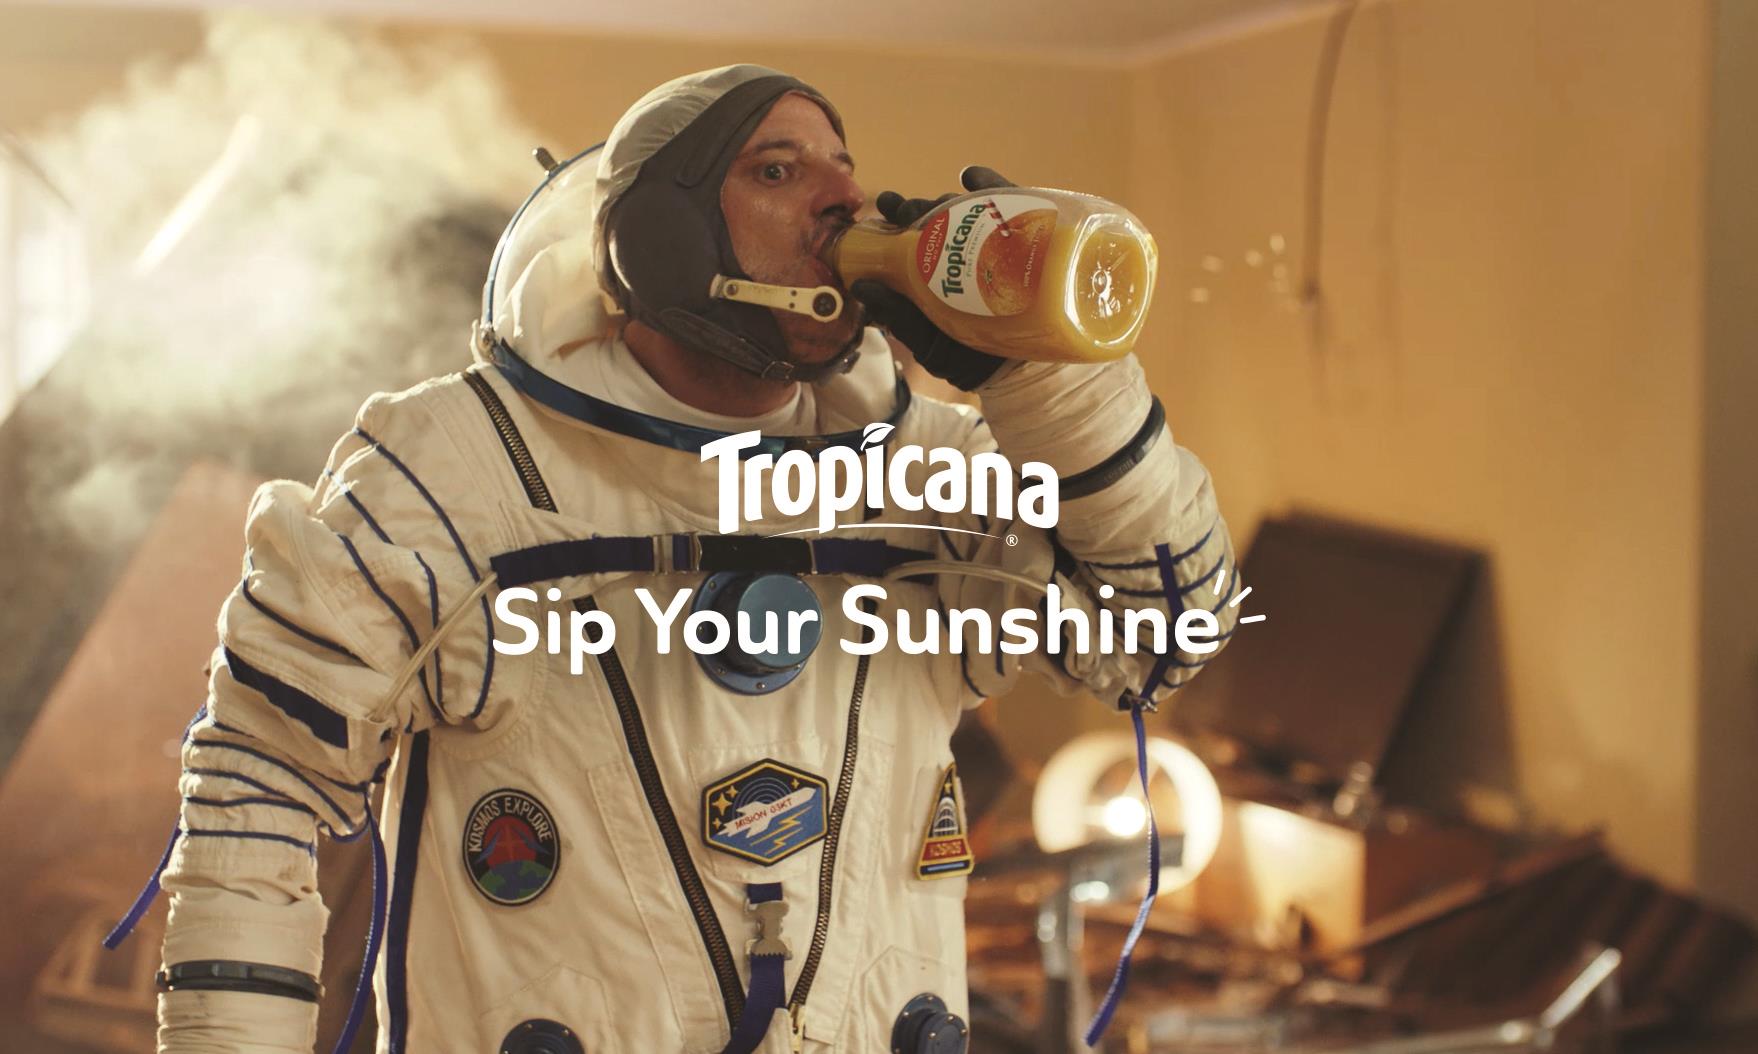 Whatever the day brings, Sip Your Sunshine